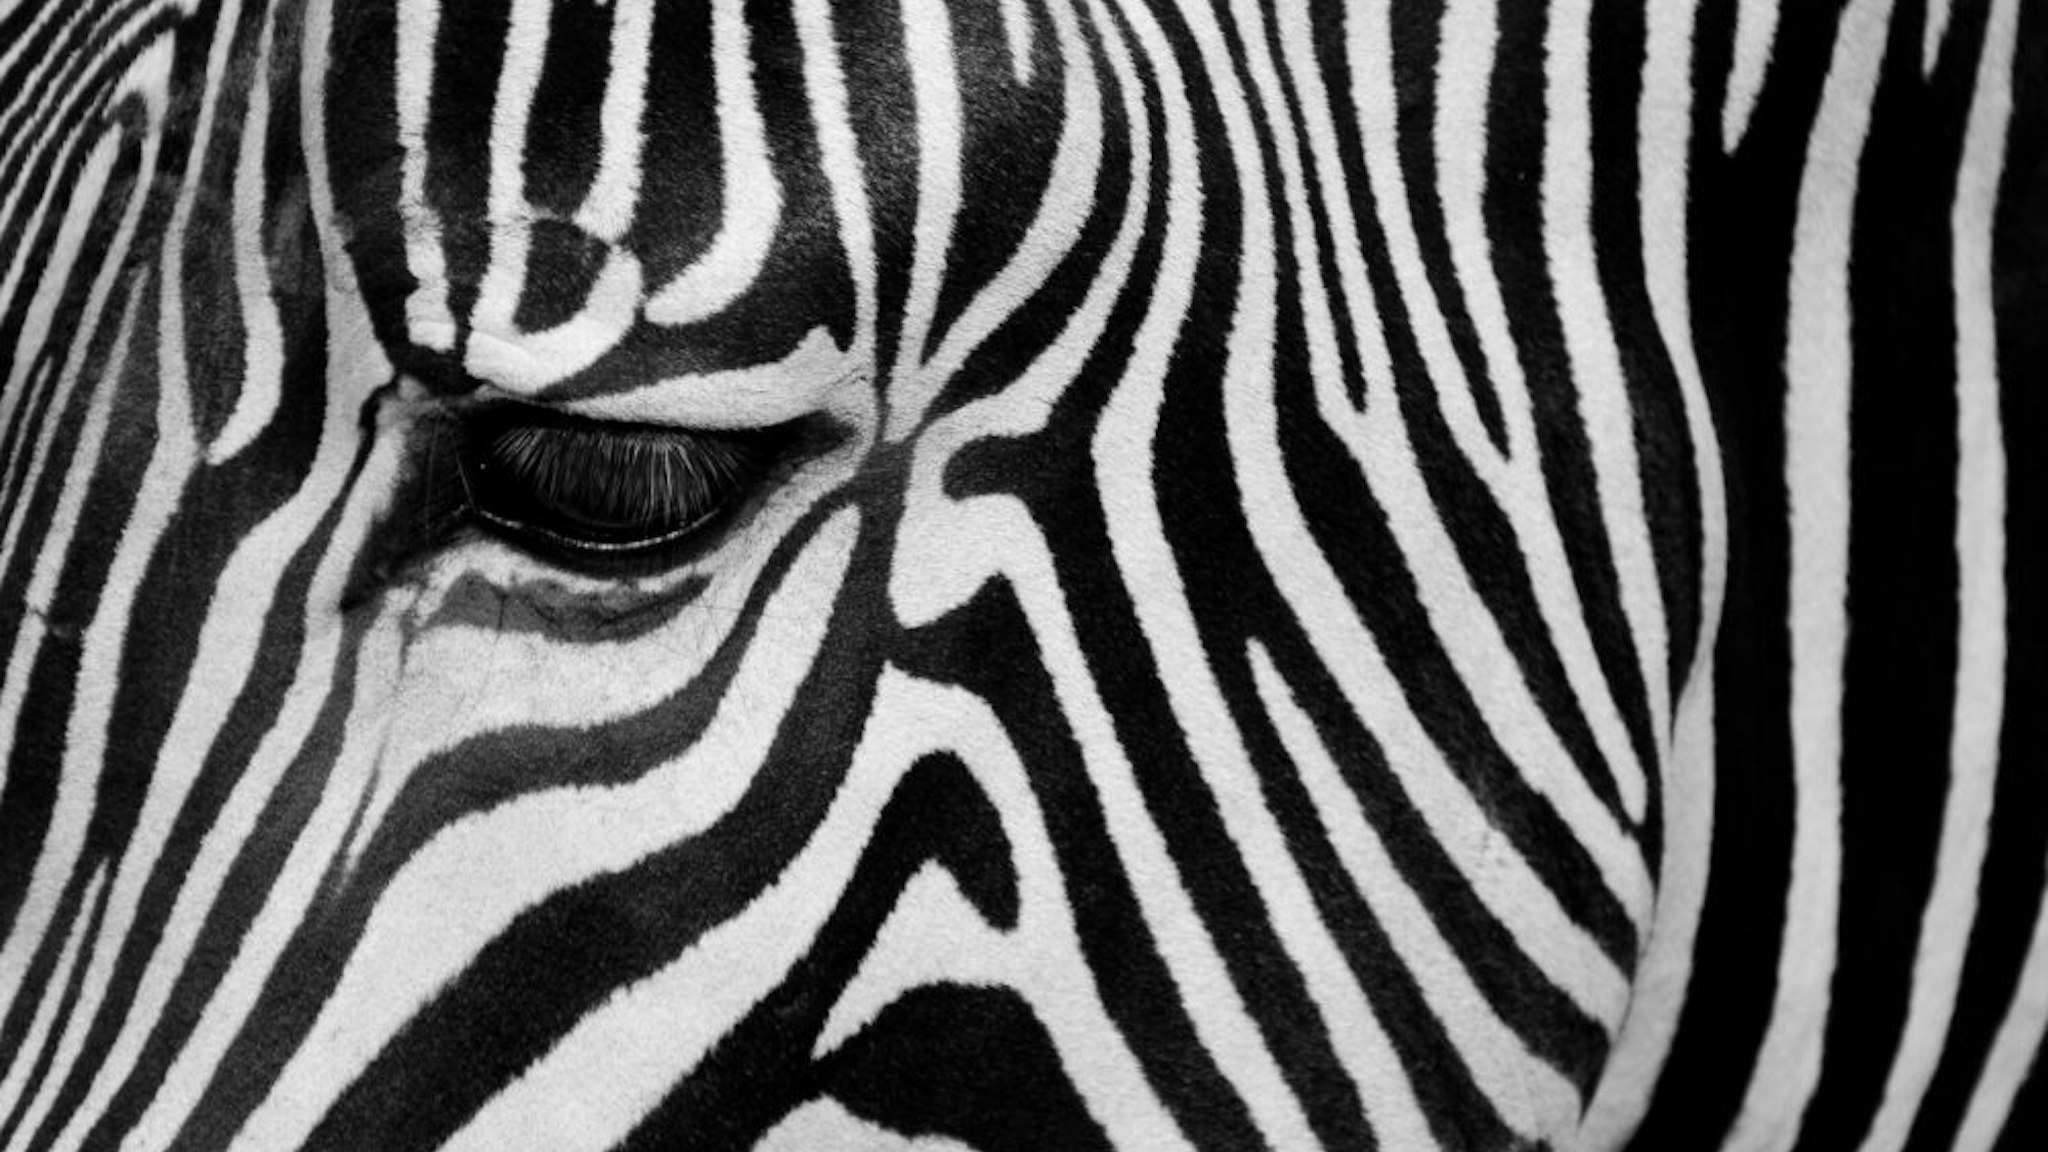 Close up of a zebra's eye and striped coat